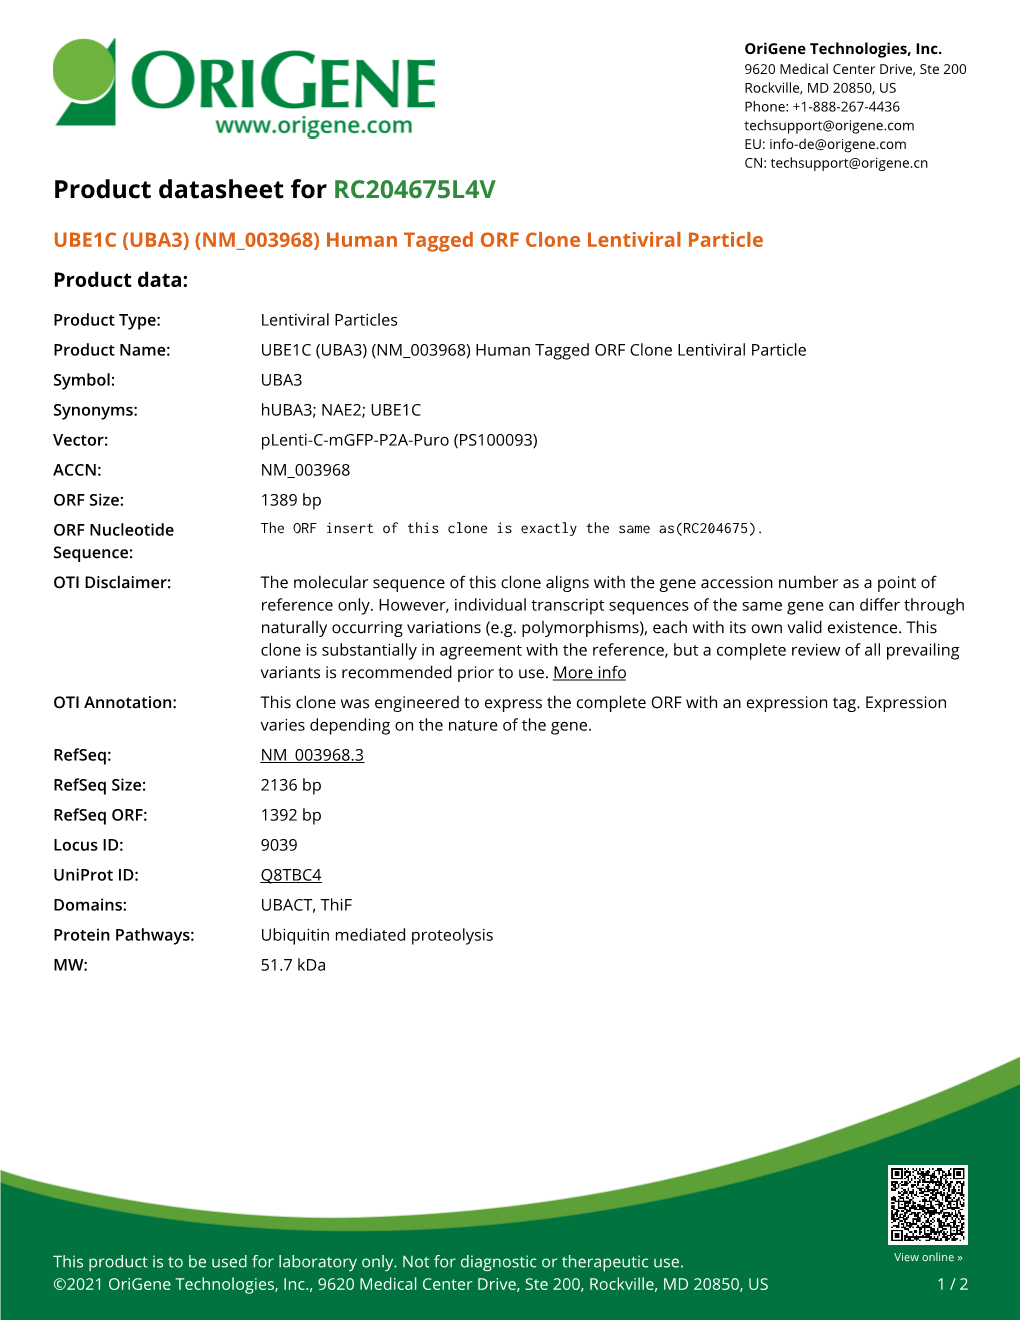 UBE1C (UBA3) (NM 003968) Human Tagged ORF Clone Lentiviral Particle Product Data